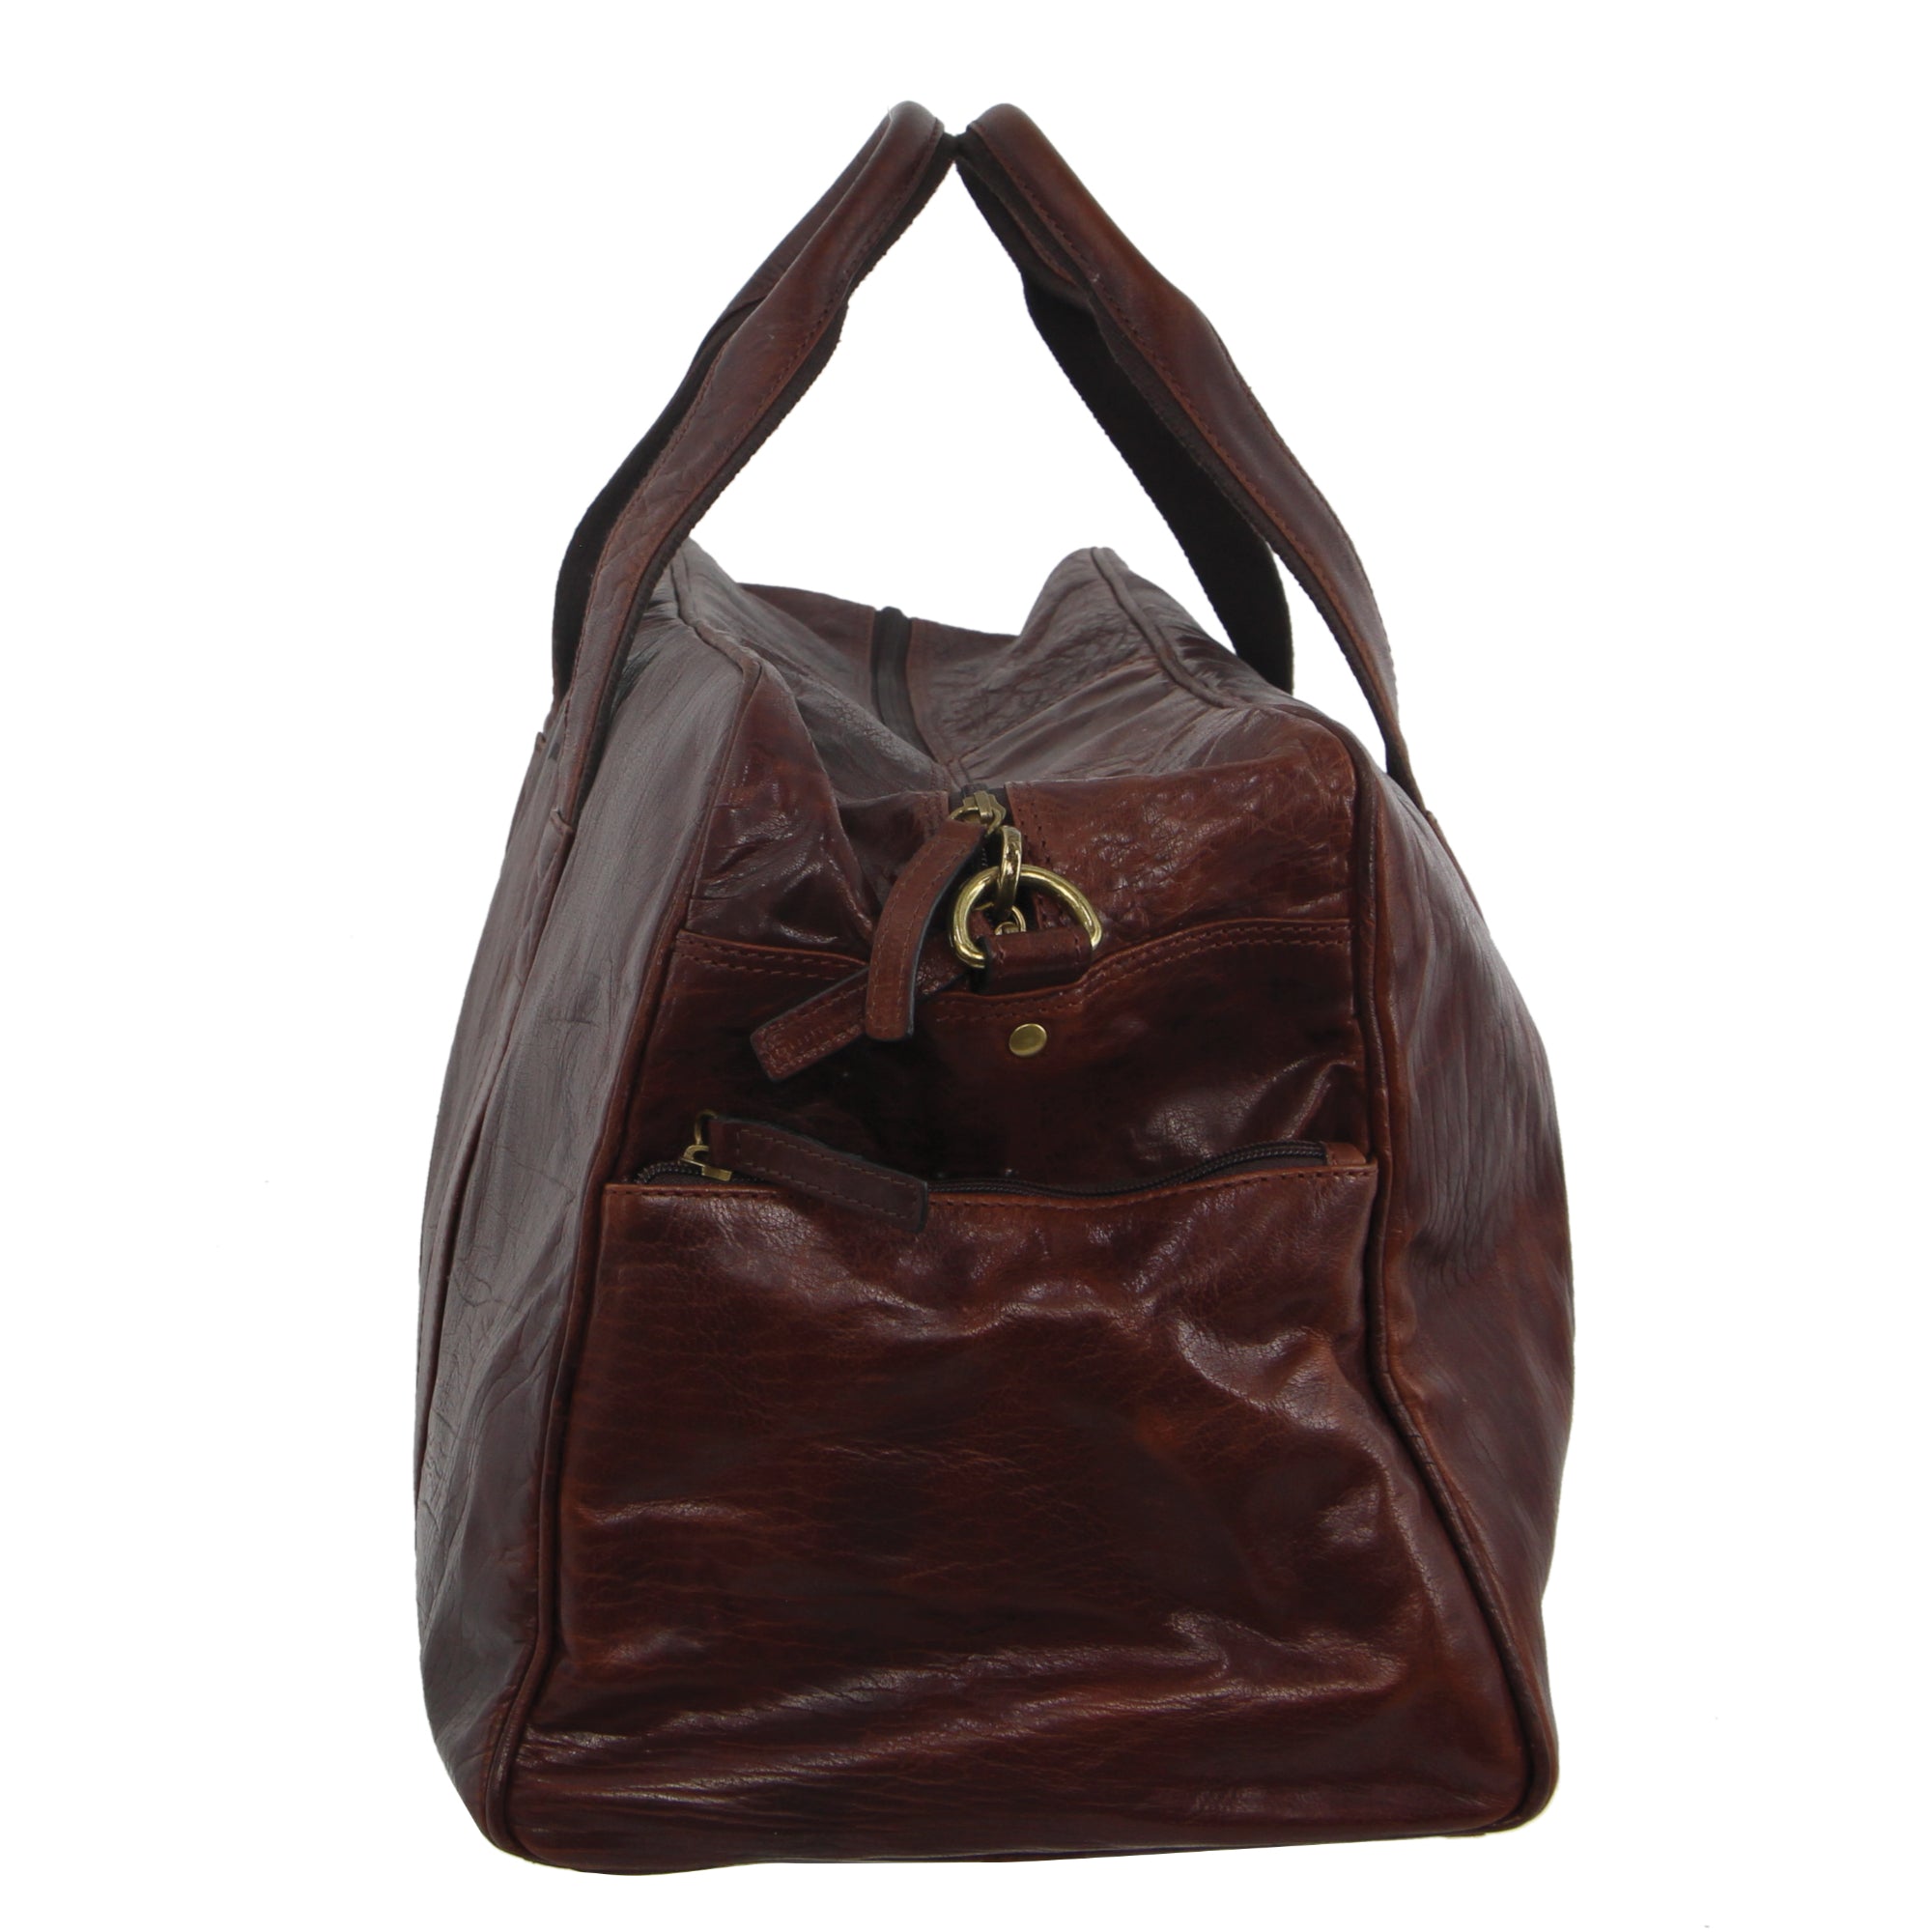 Pierre Cardin Rustic Leather Business/Overnight Bag in Chestnut